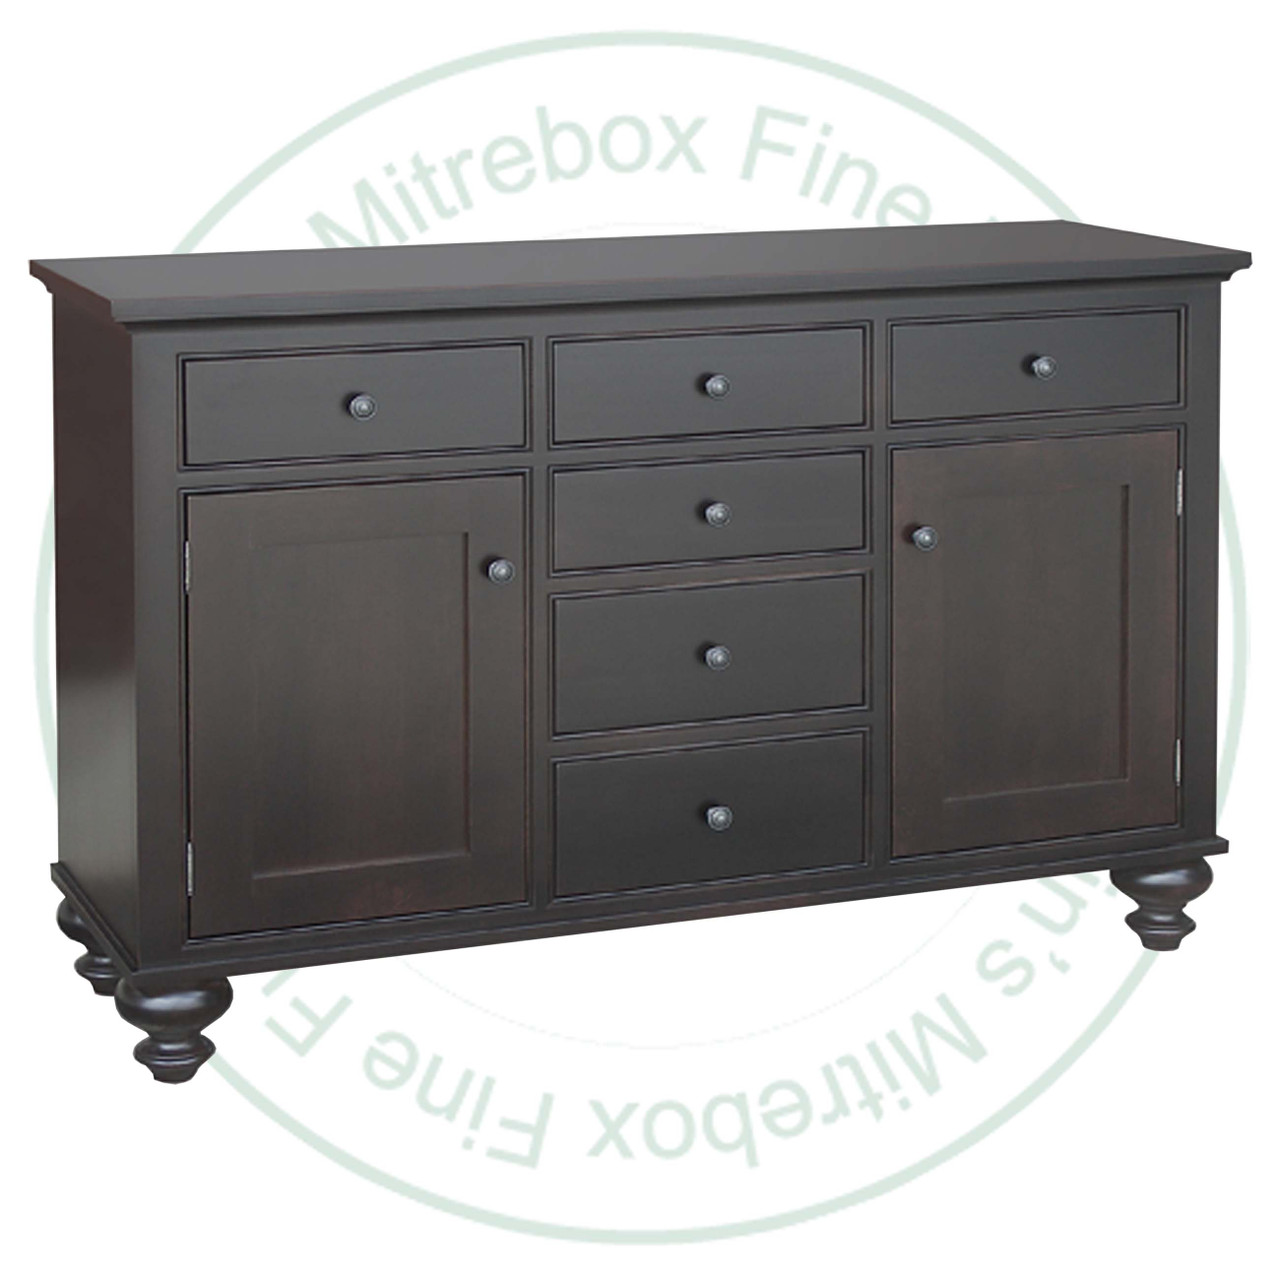 Pine Georgetown Sideboard 19.5'' Deep x 61.5'' Wide x 42'' High With 2 Wood Doors And 6 Drawers